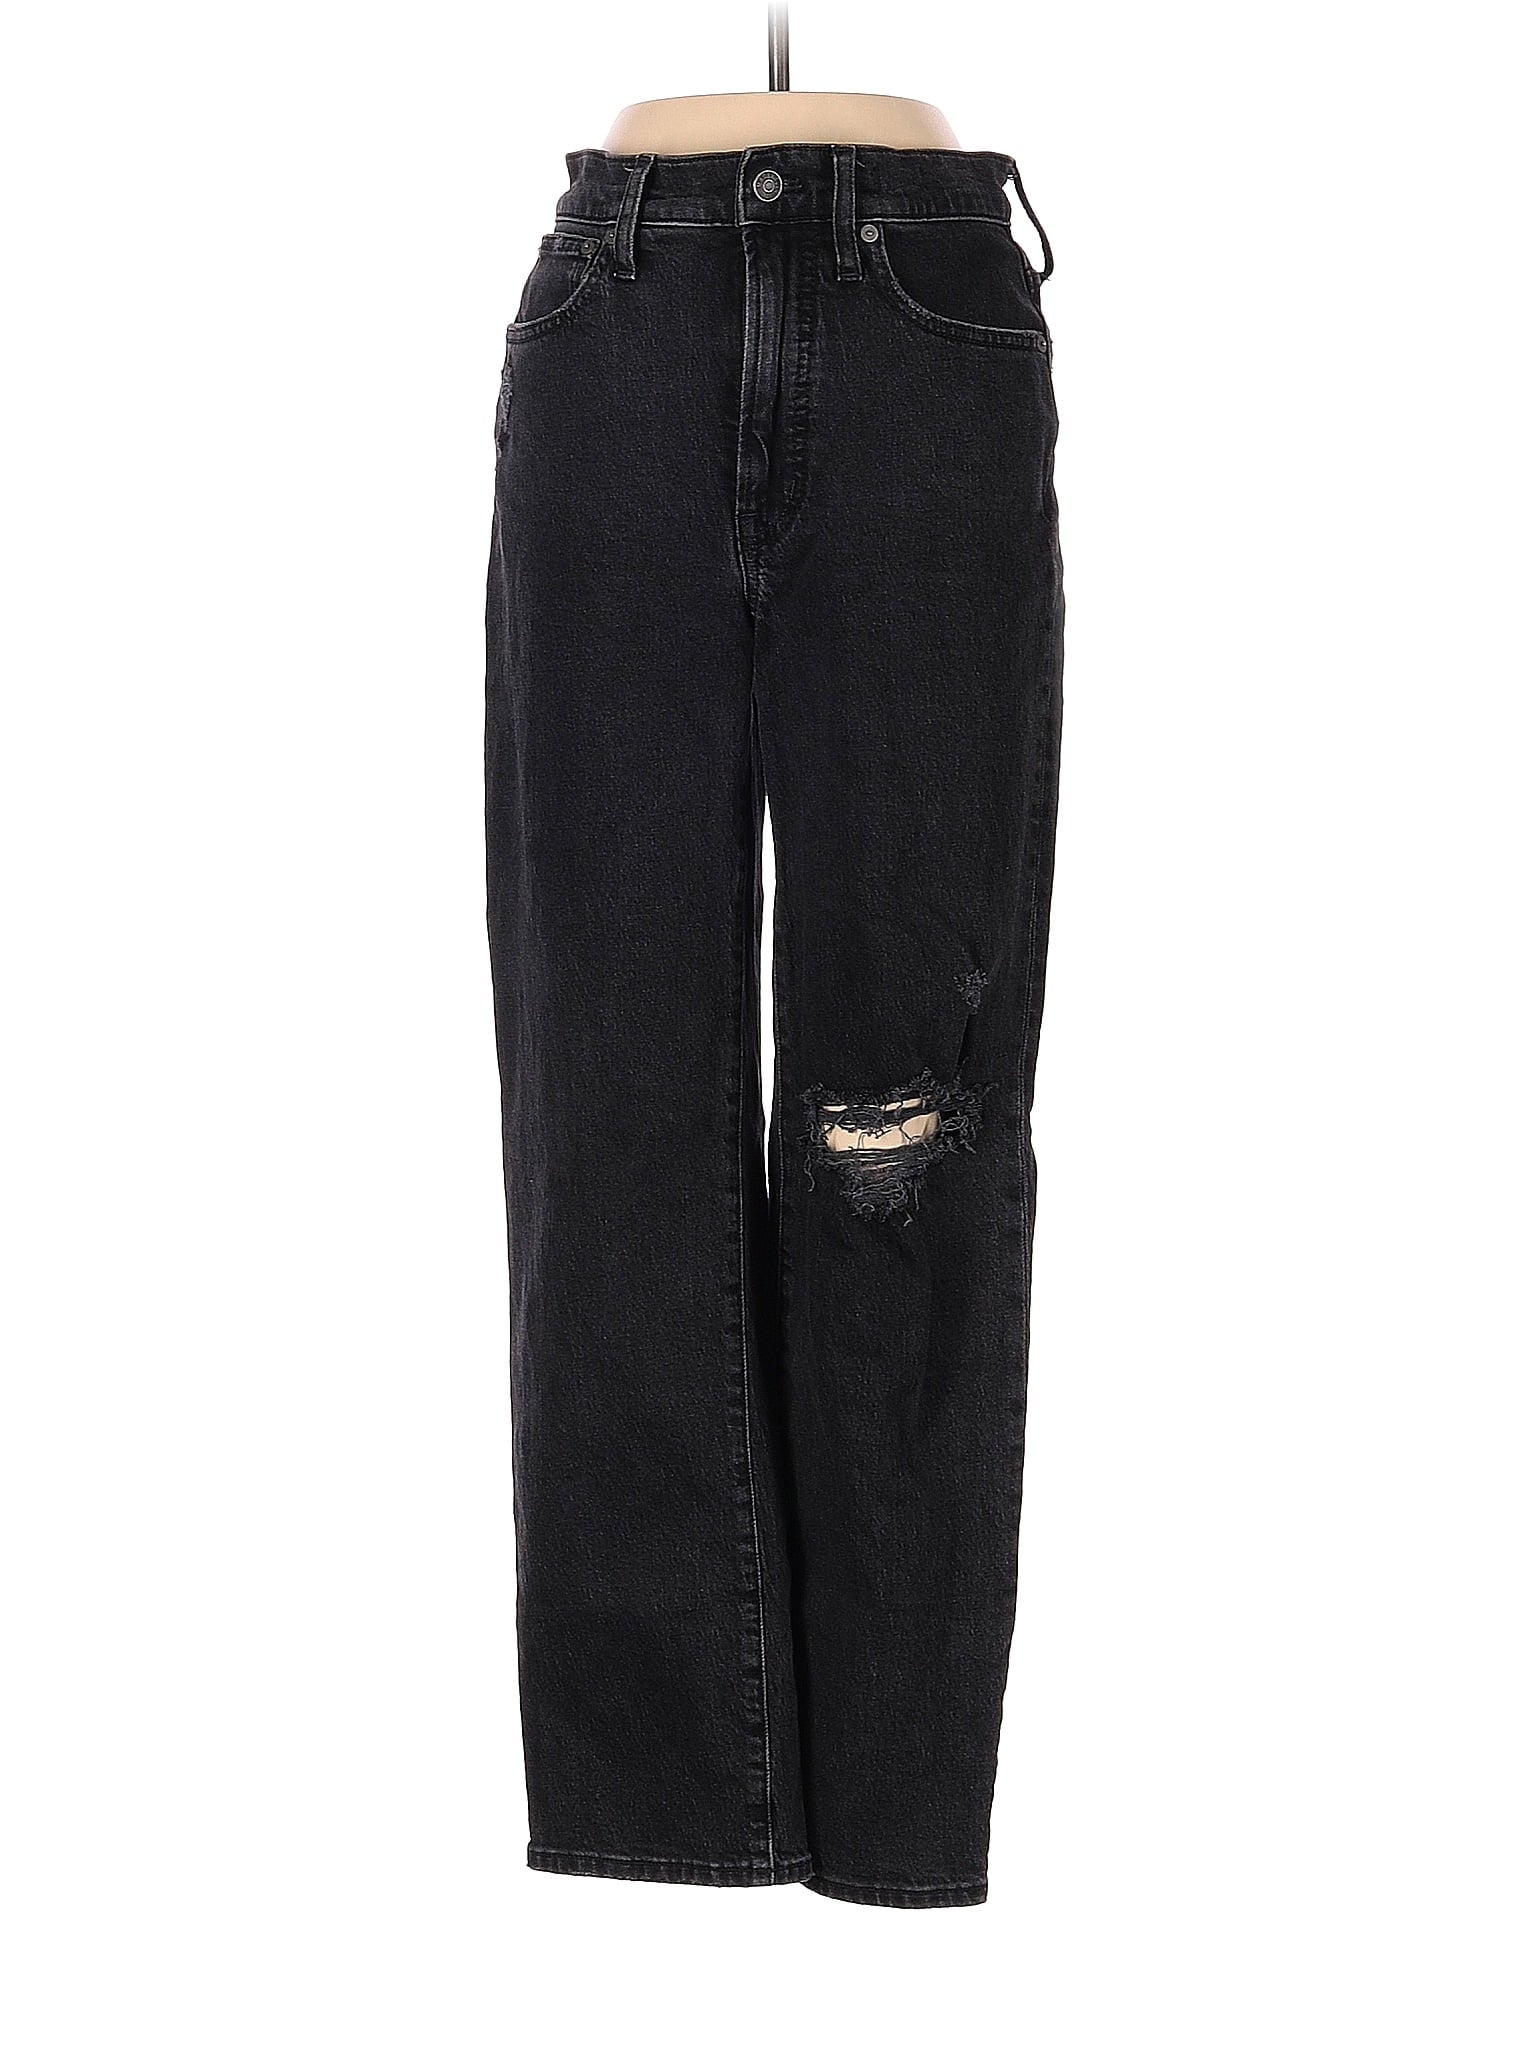 Mid-Rise Boyjeans The Perfect Vintage Straight Jean In Rosella Wash: Ripped Edition in Dark Wash waist size - 24